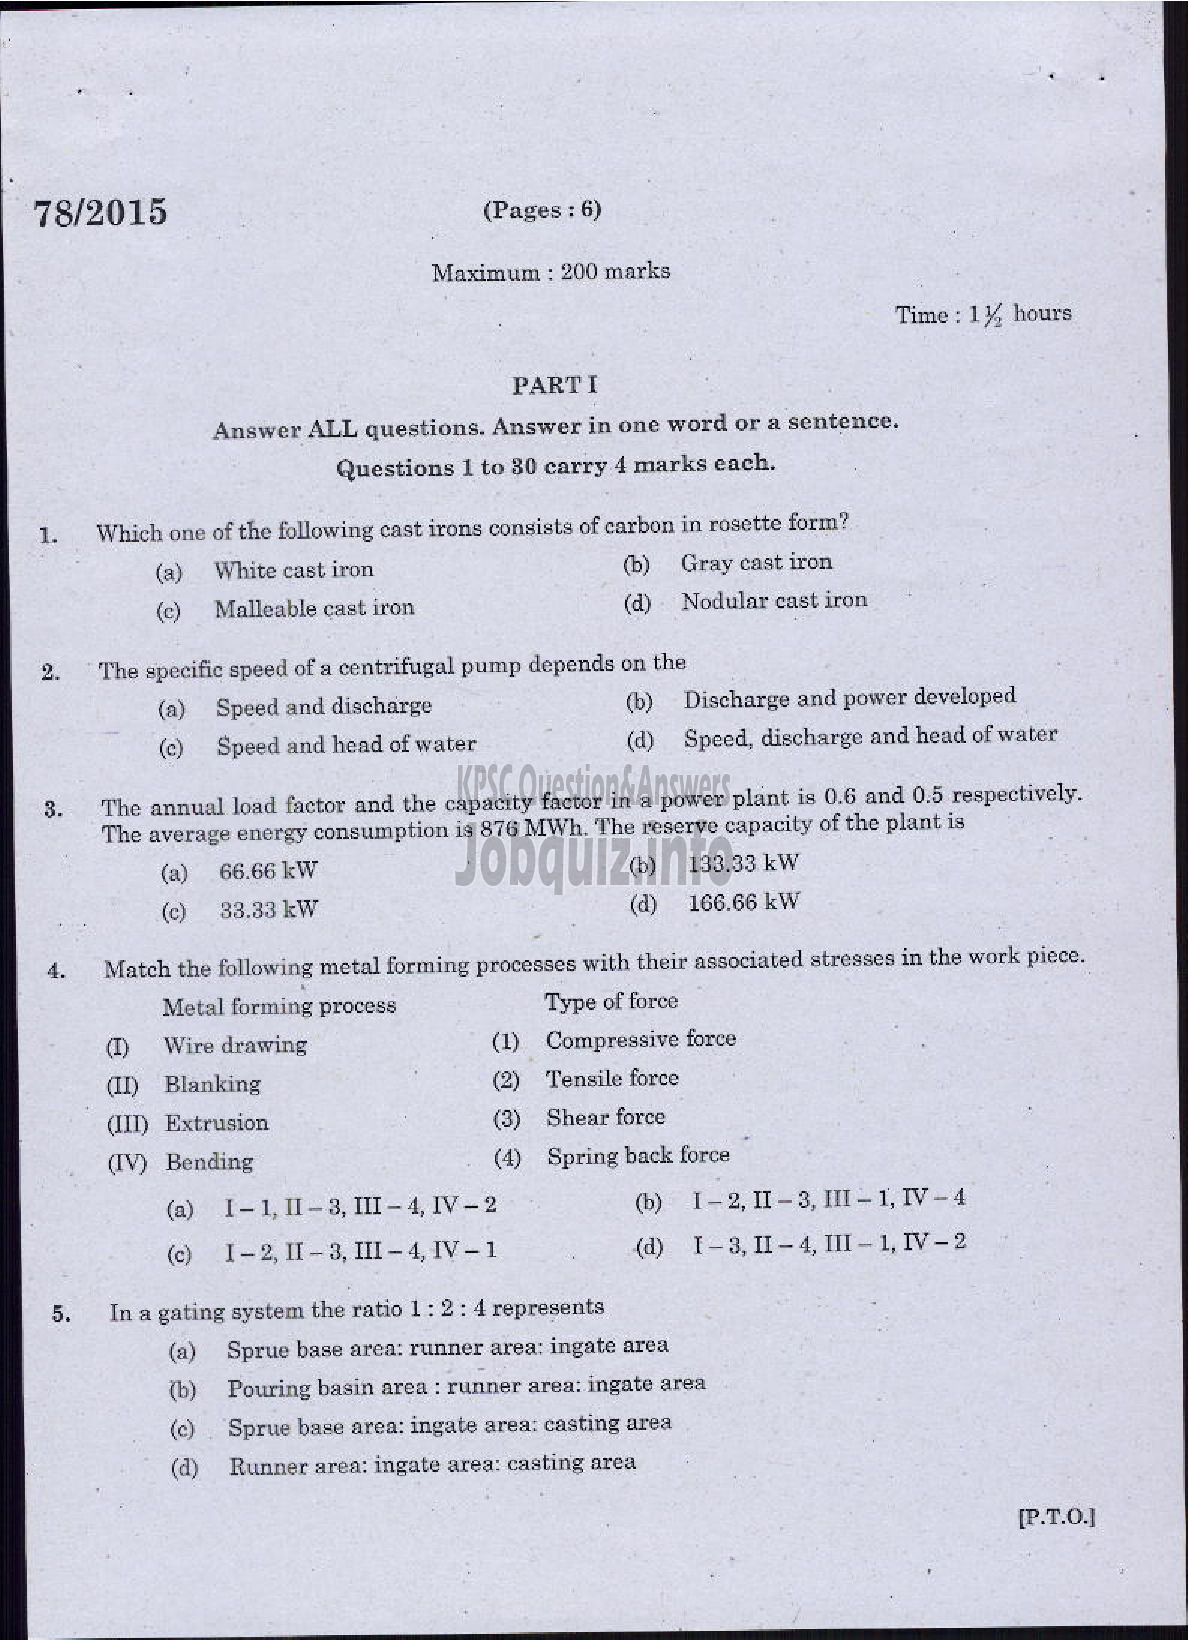 Kerala PSC Question Paper - MECHANICAL ENGINEERING-6